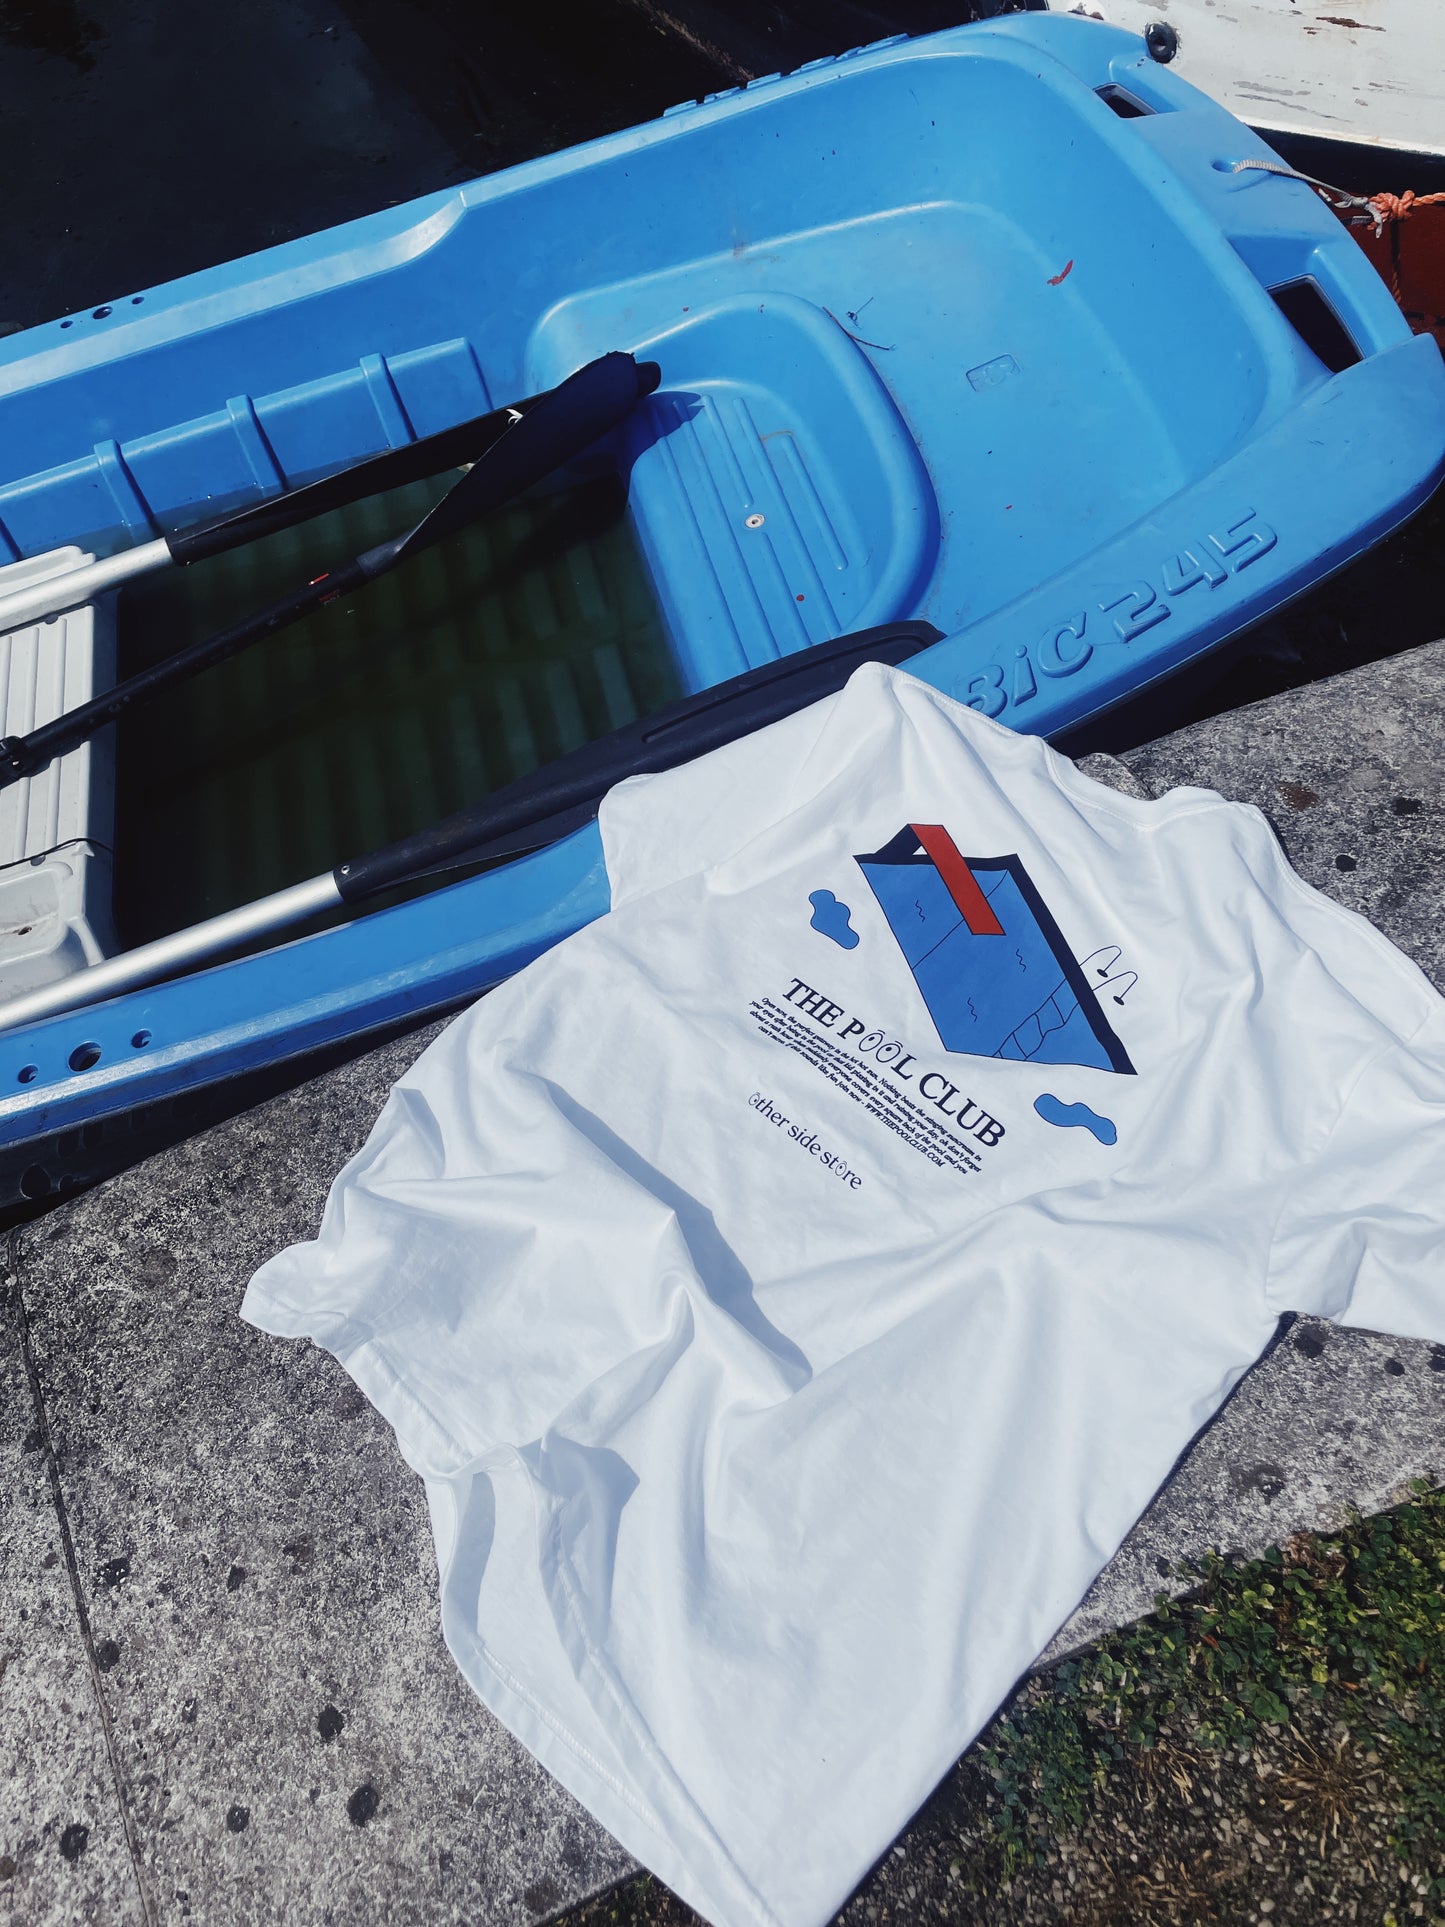 Load image into Gallery viewer, Other Side Store &amp;#39;Pool Club&amp;#39; Tee - White
